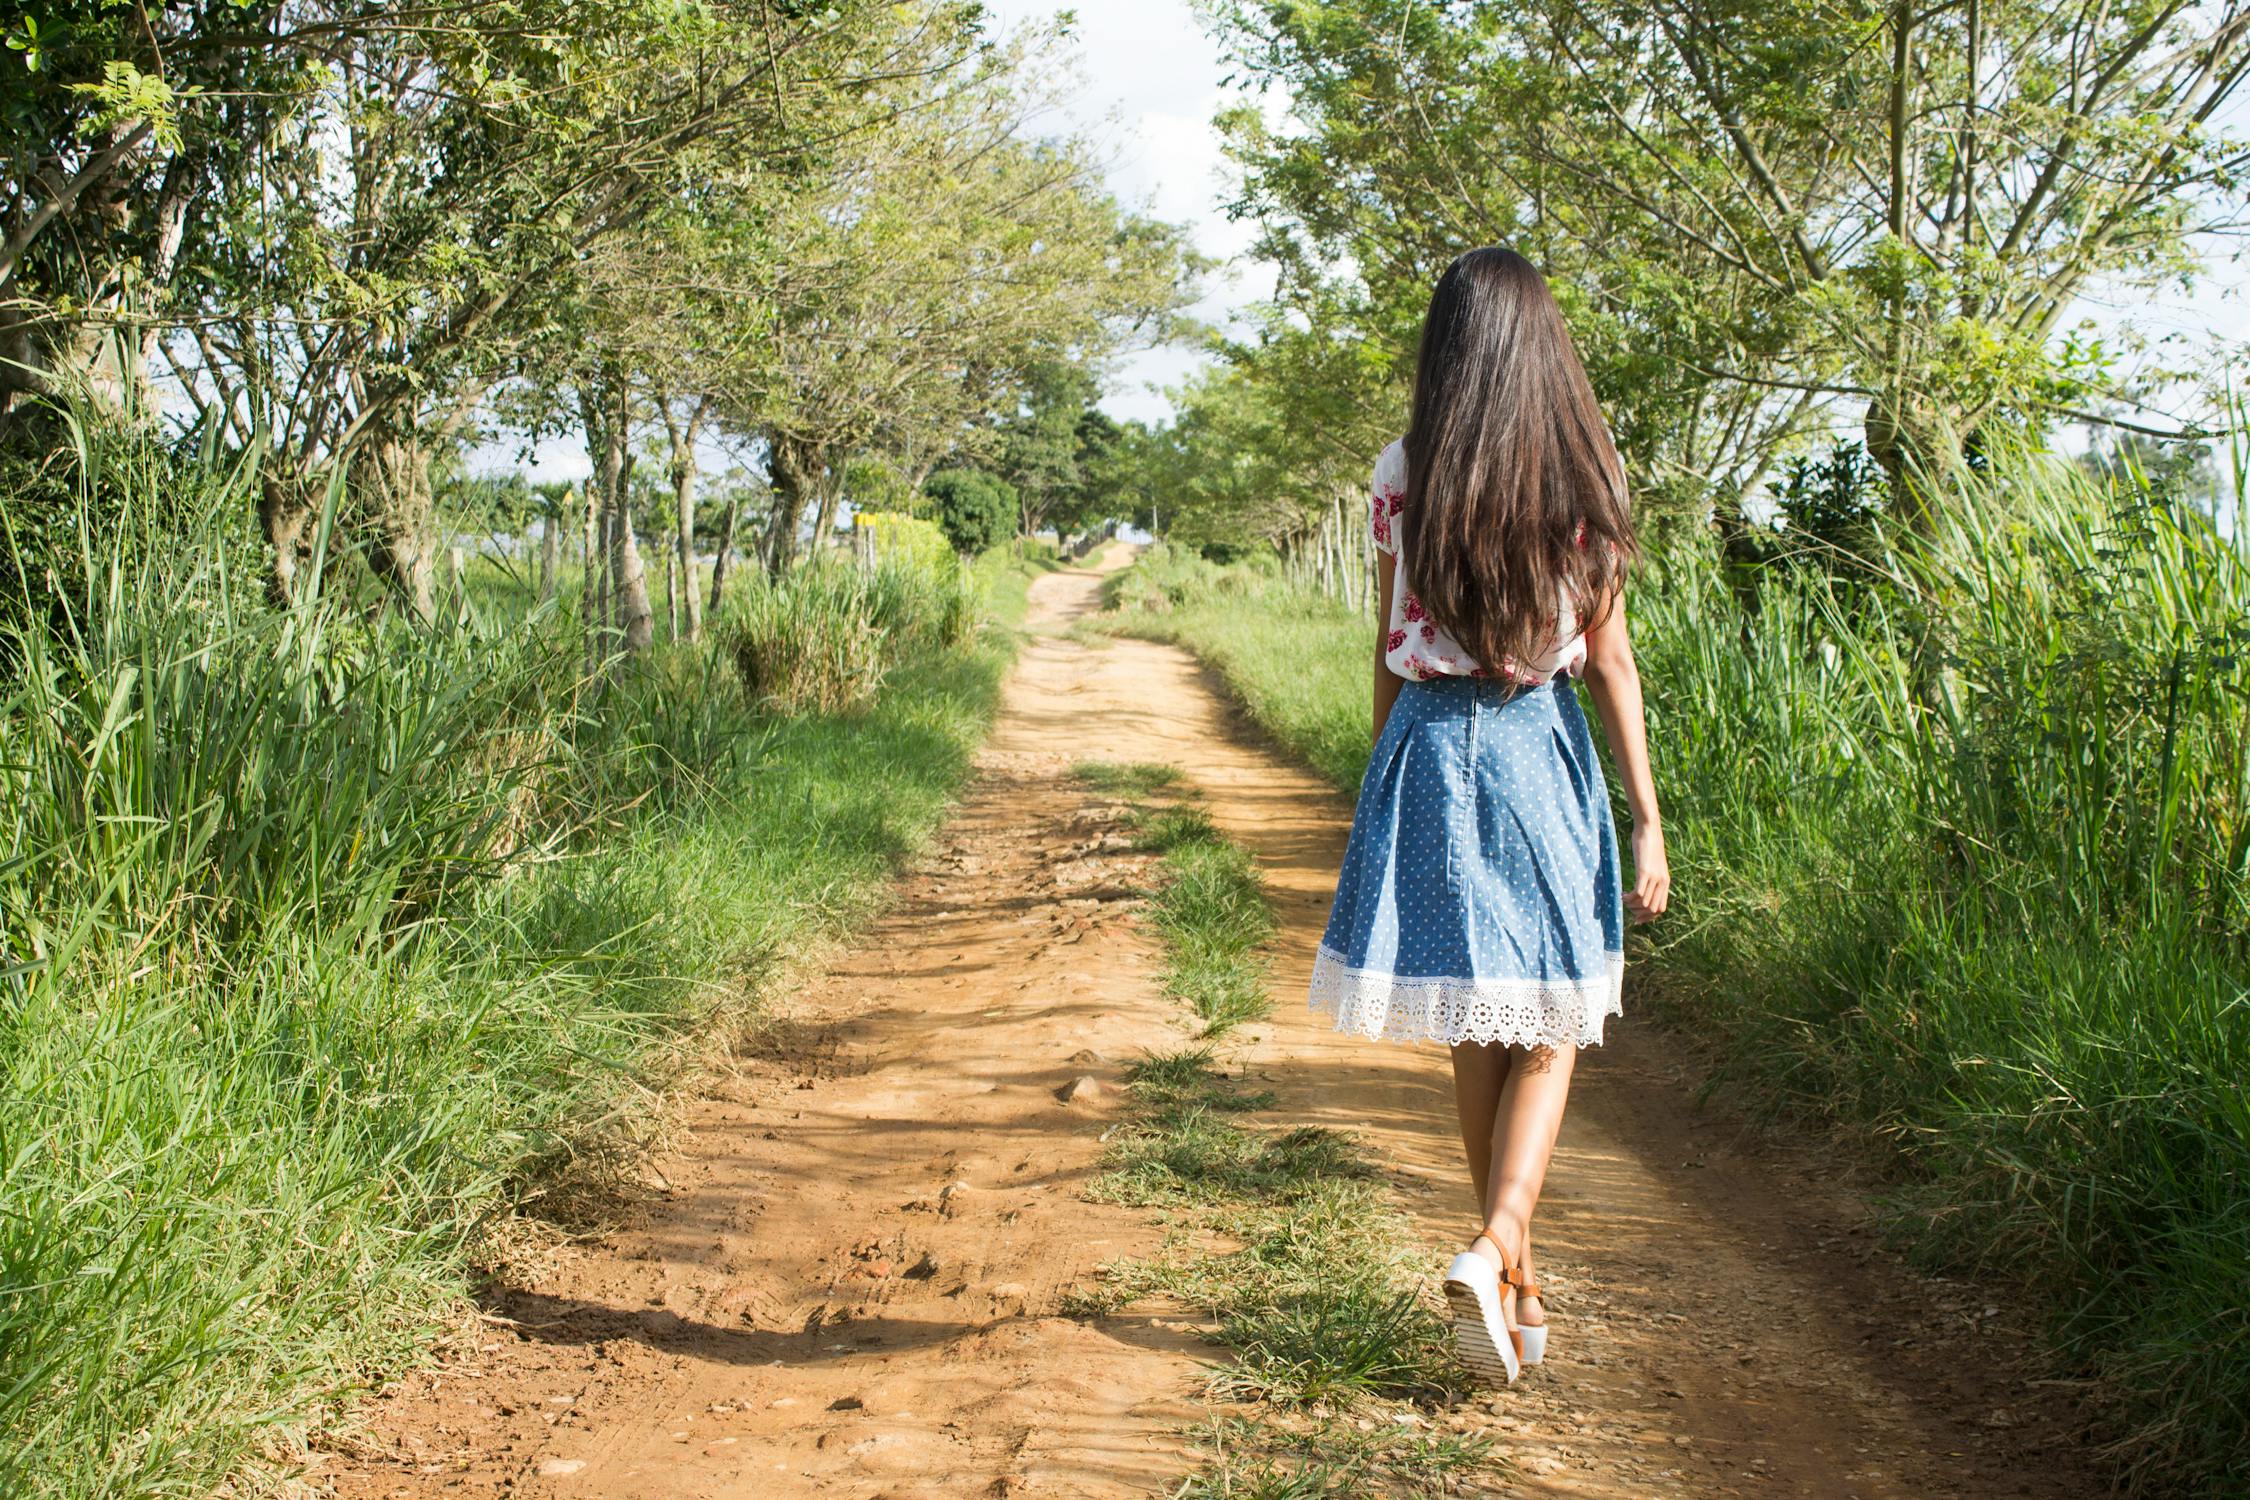 Indian Girl Photo by Ana Madeleine Uribe from Pexels: https://www.pexels.com/photo/woman-wearing-blue-and-white-skirt-walking-near-green-grass-during-daytime-144474/